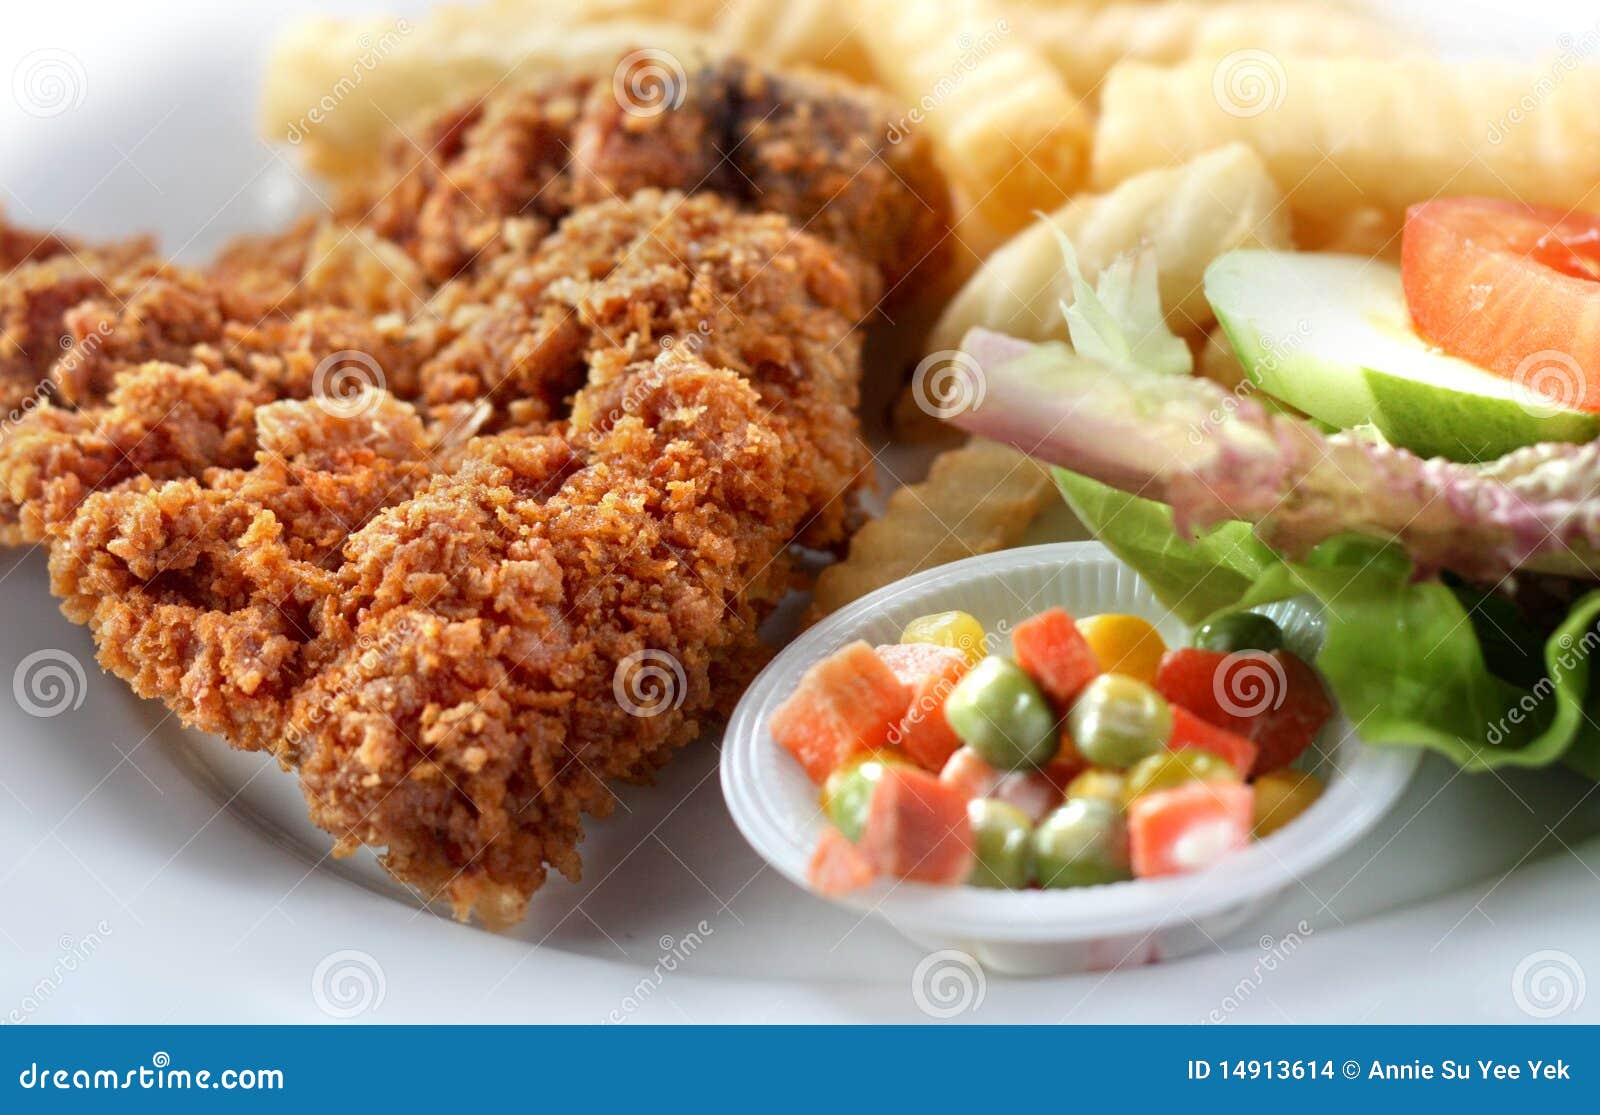 Fried Chicken Chop And Chips With Salad Stock Images 